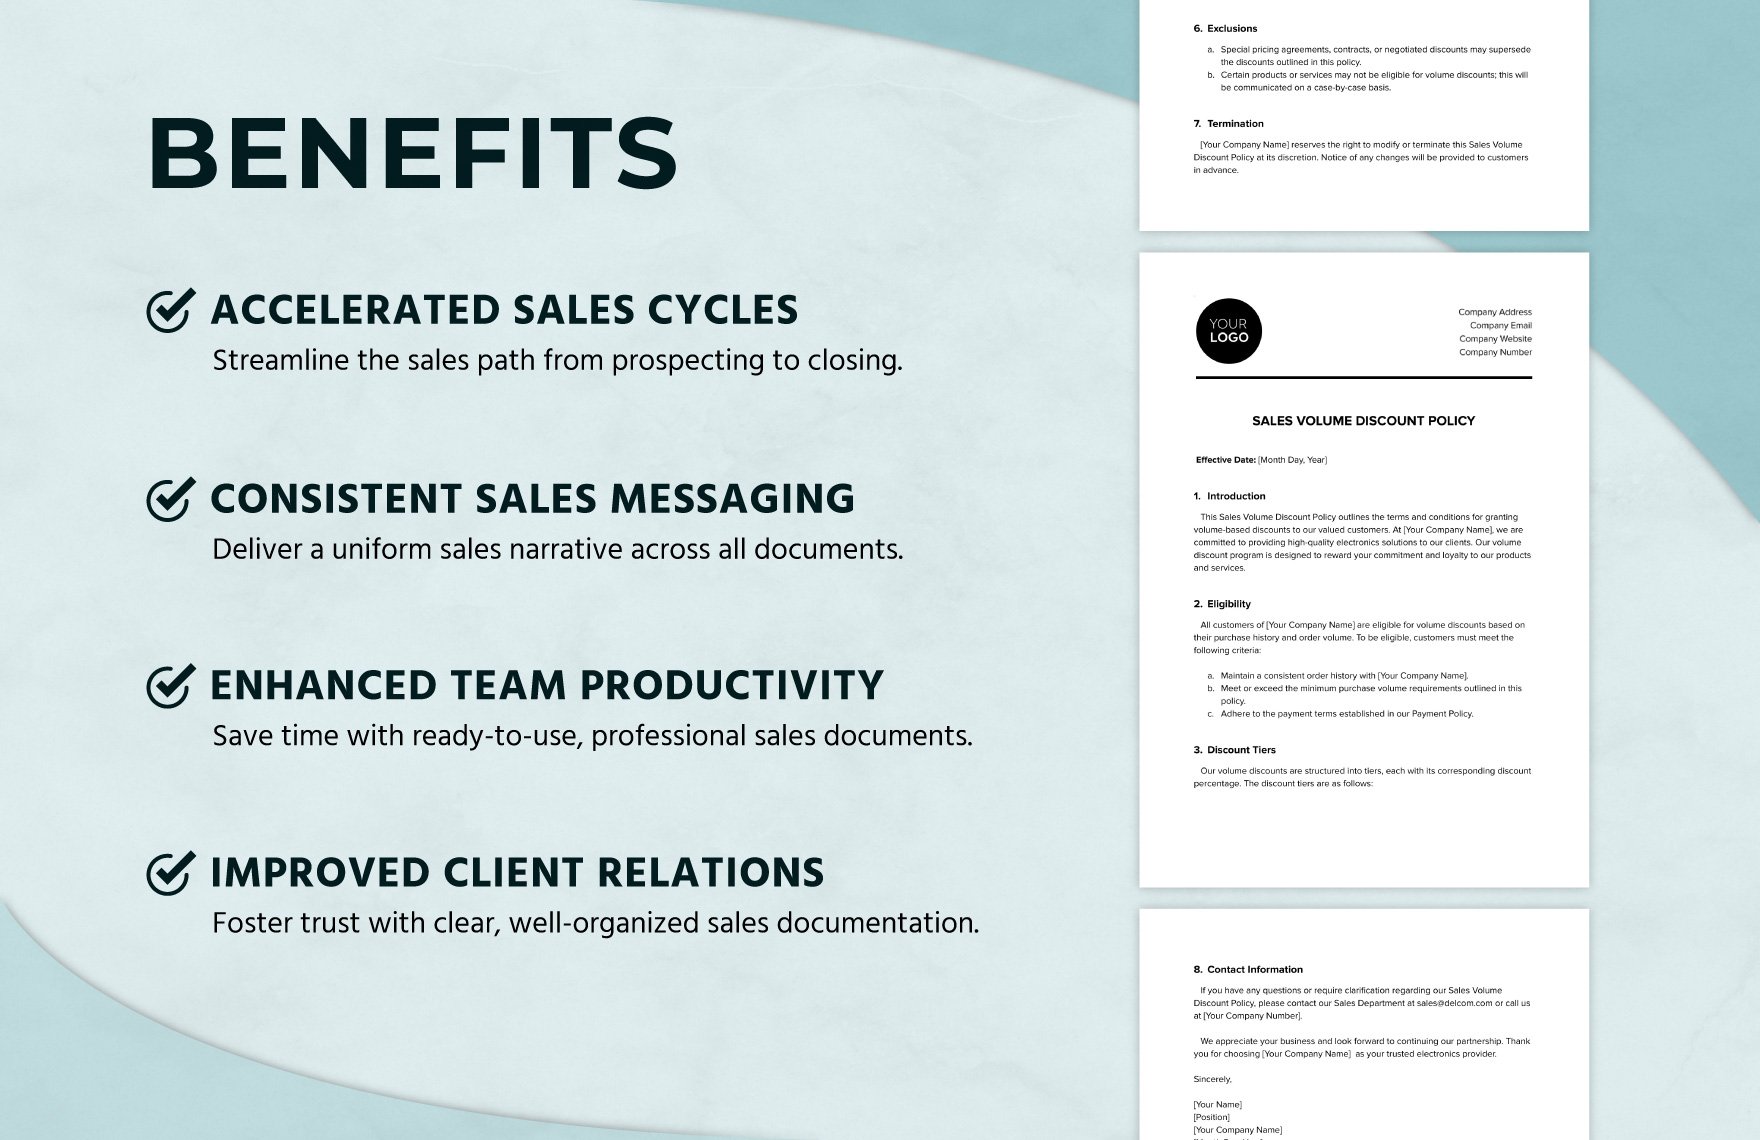 Sales Volume Discount Policy Template